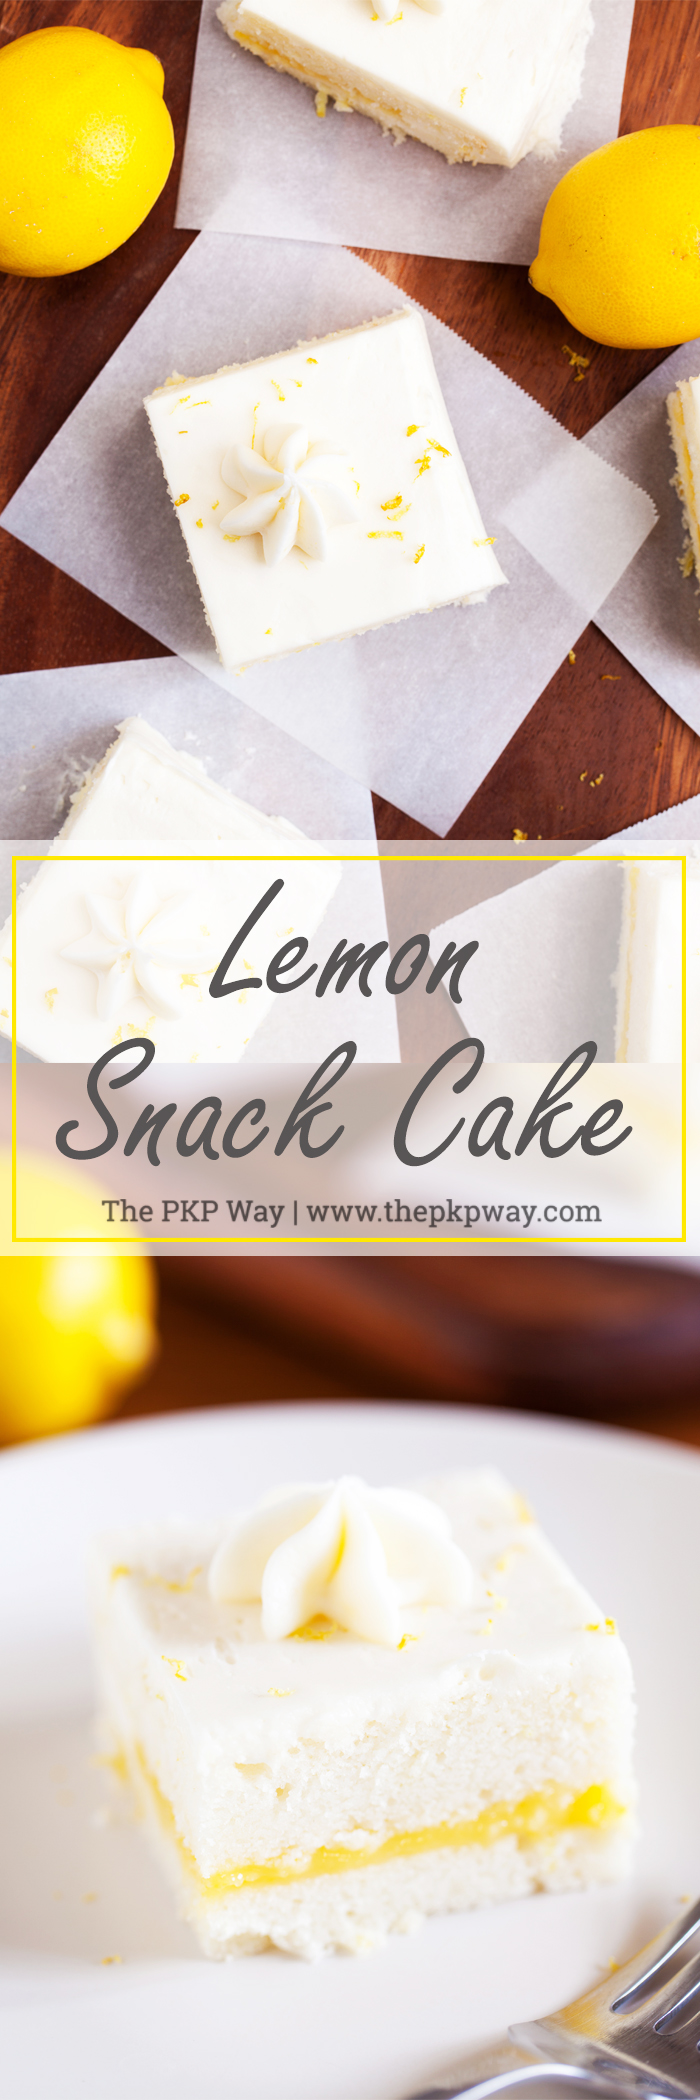 Two layers of soft white cake, lemon curd filling, and cream cheese frosting make this Lemon Snack Cake the perfect “light” and bright dessert.